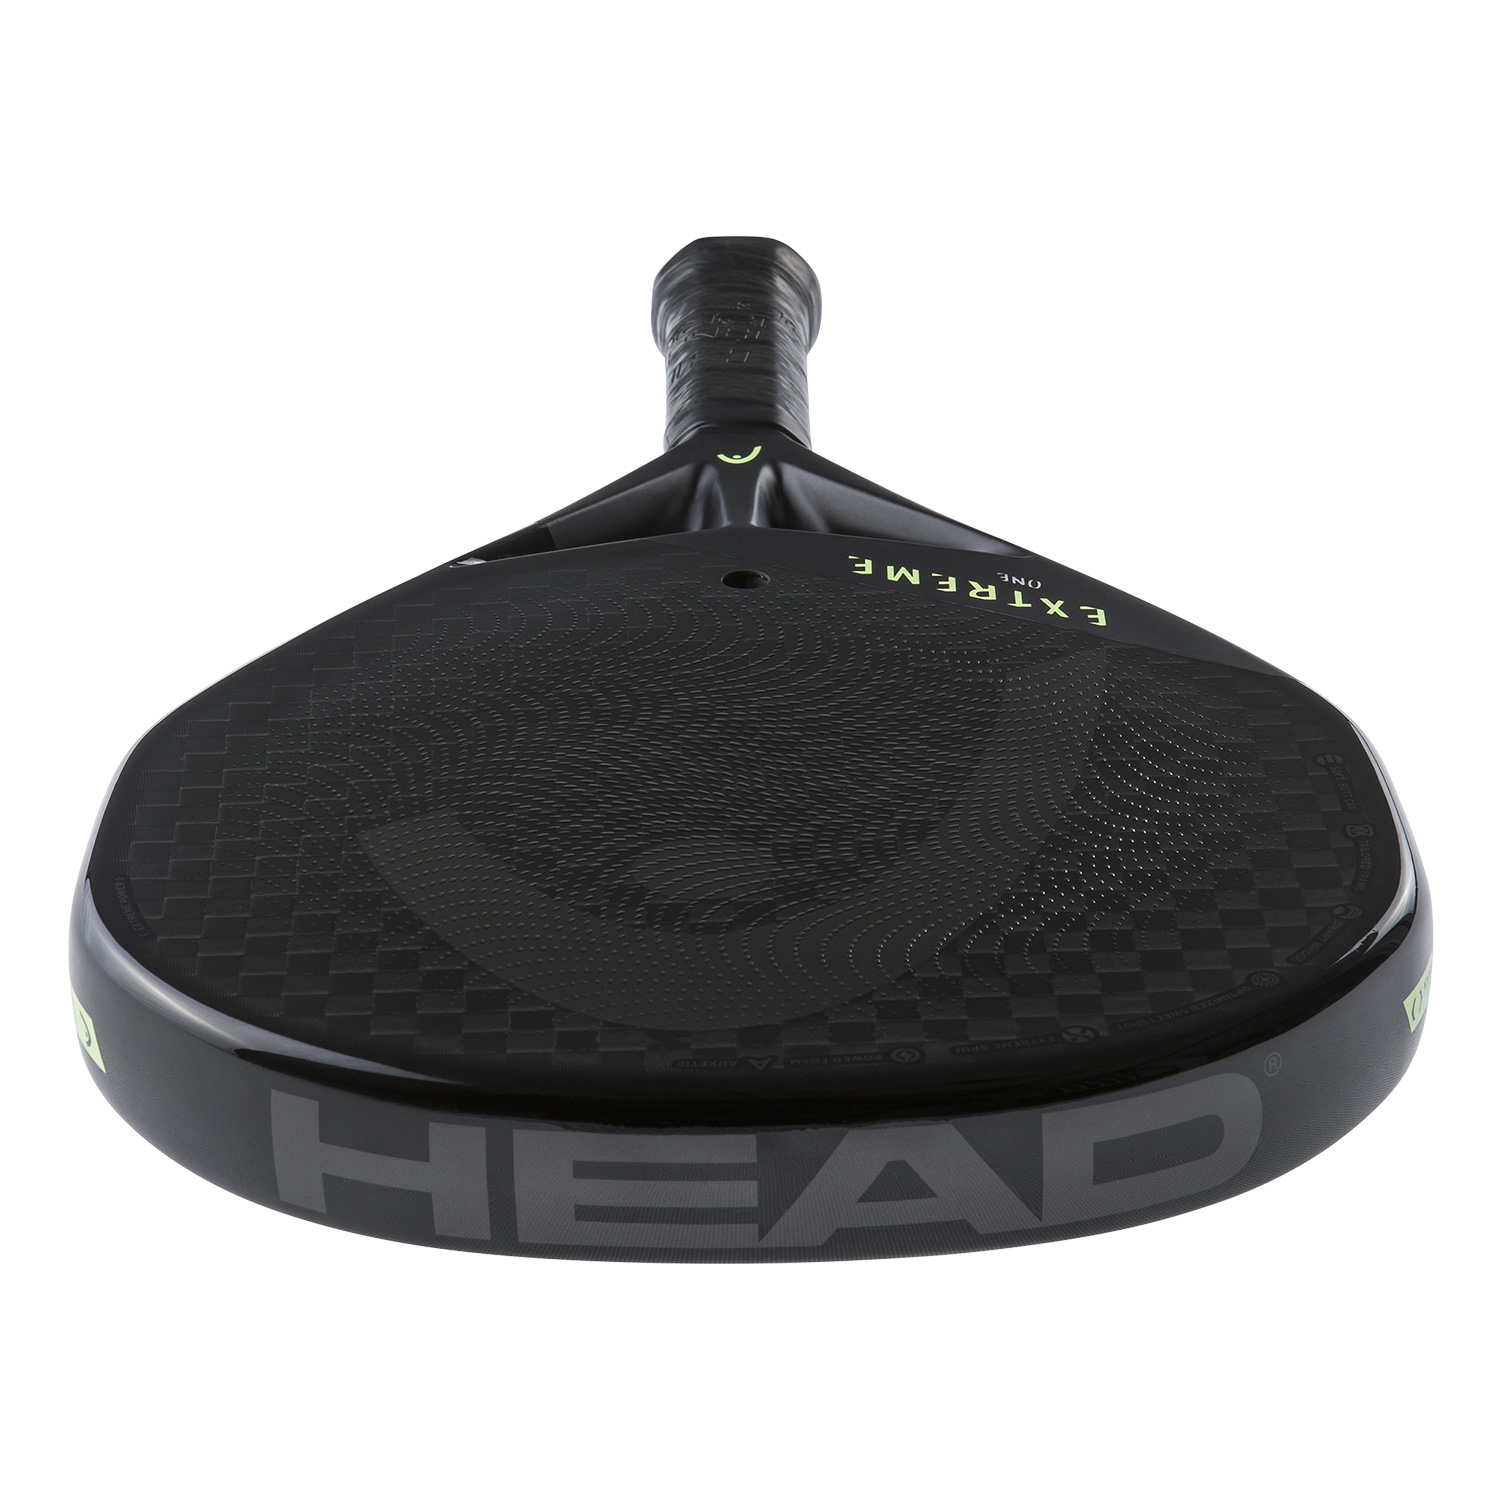 Head Extreme One Padel - Black/Fluo Green